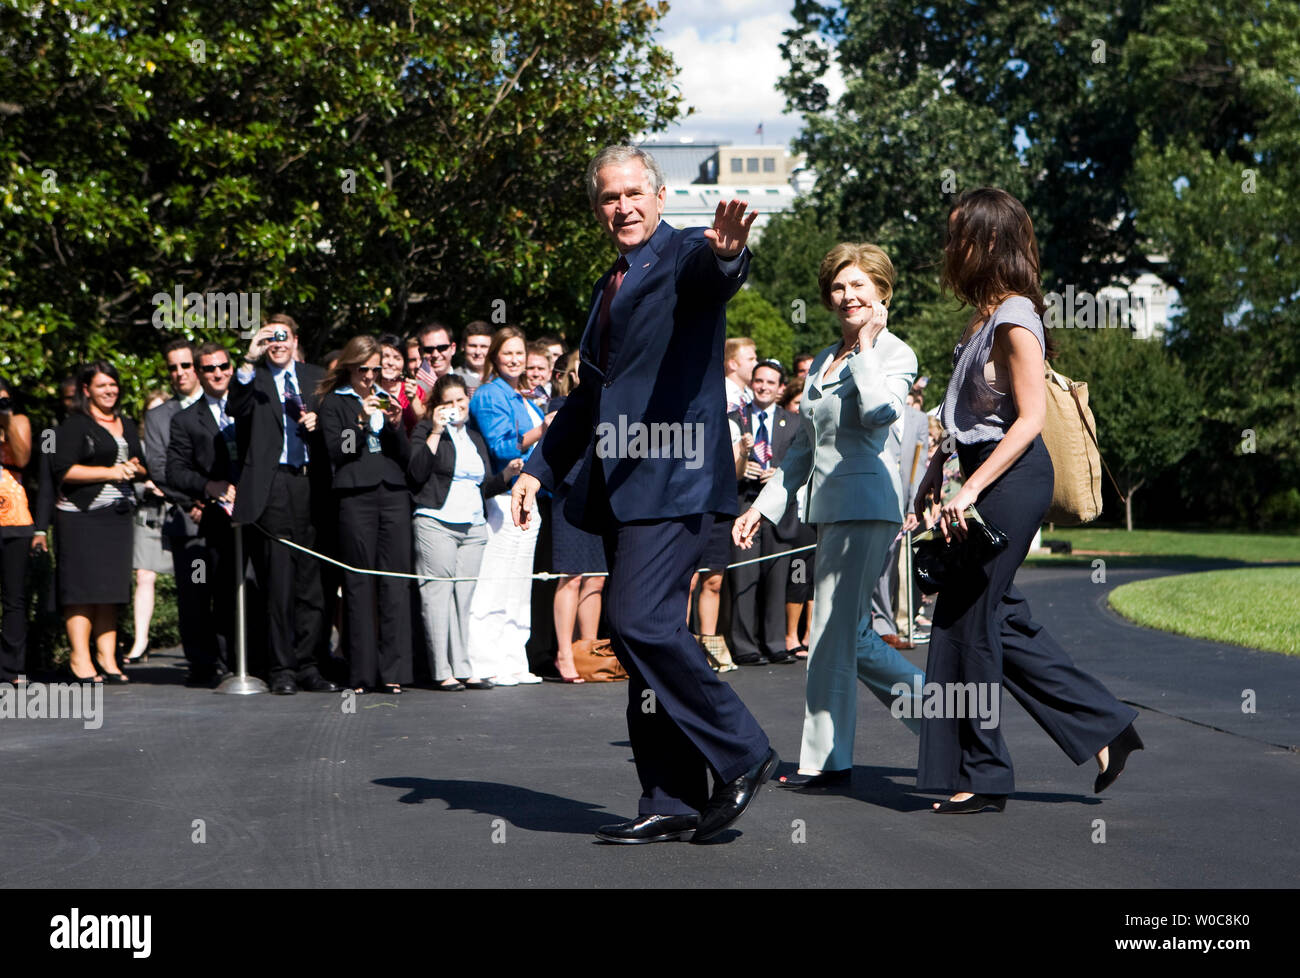 President George W. Bush waves as he walks with first lady Laura Bush and daughter Barbara Bush after returning to the White House in Washington on August 11, 2008. Bush has returned from attending some of the 2008 Olympics Games in Beijing. (UPI Photo/Patrick D. McDermott) Stock Photo